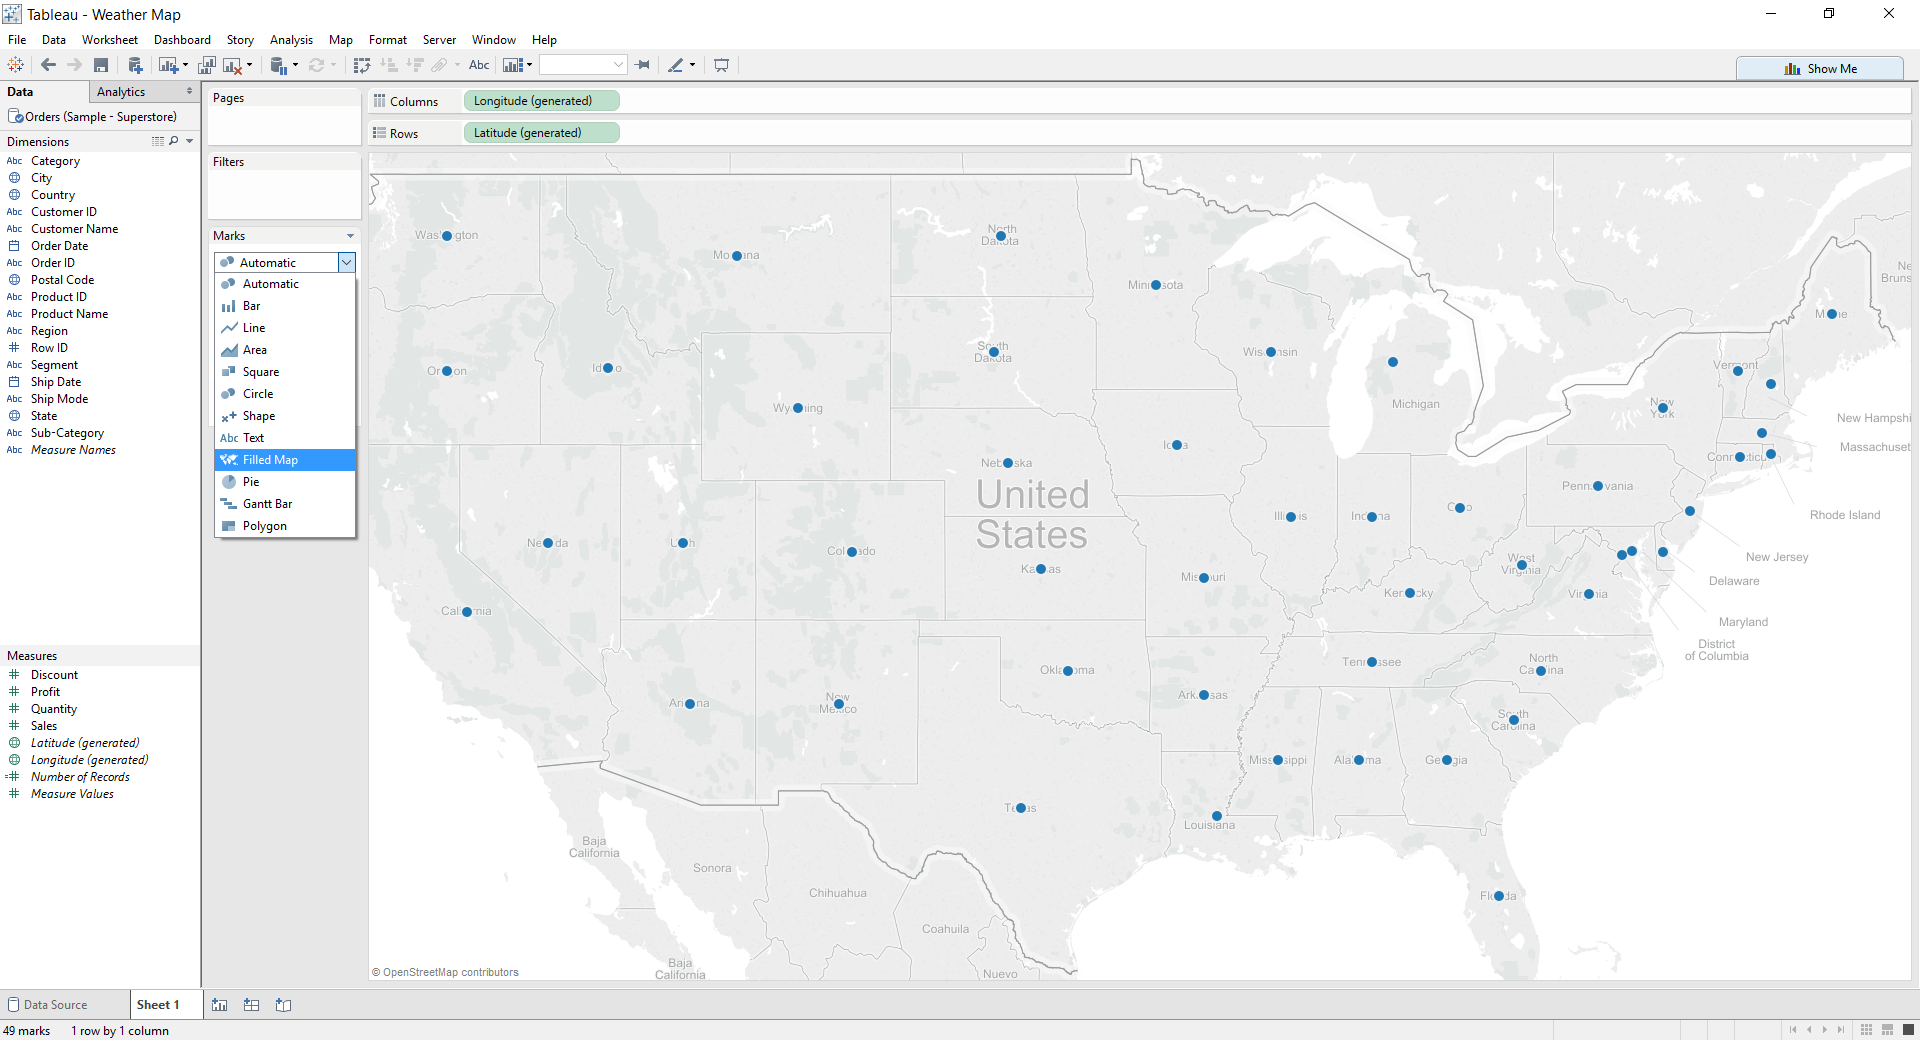 Tableau: Change to Filled Map